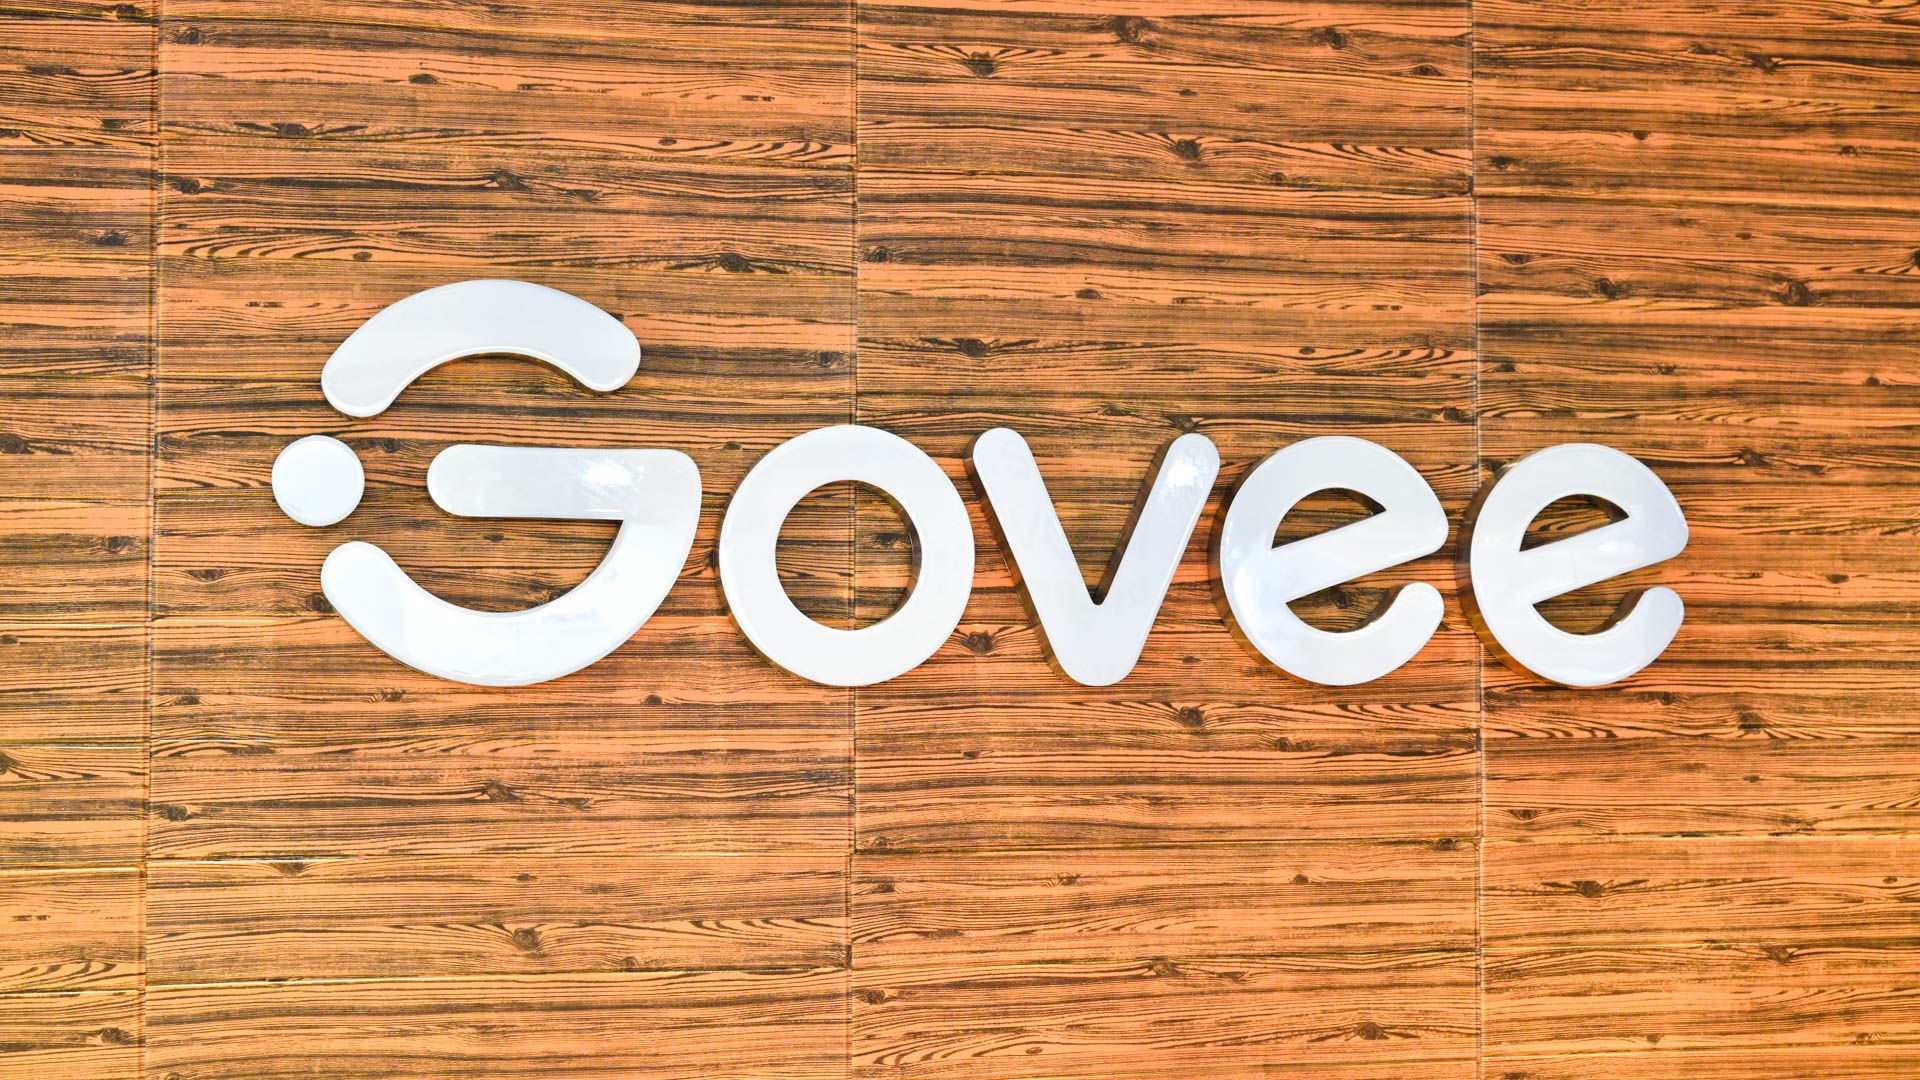 Govee Logo on Wall at CES 2023